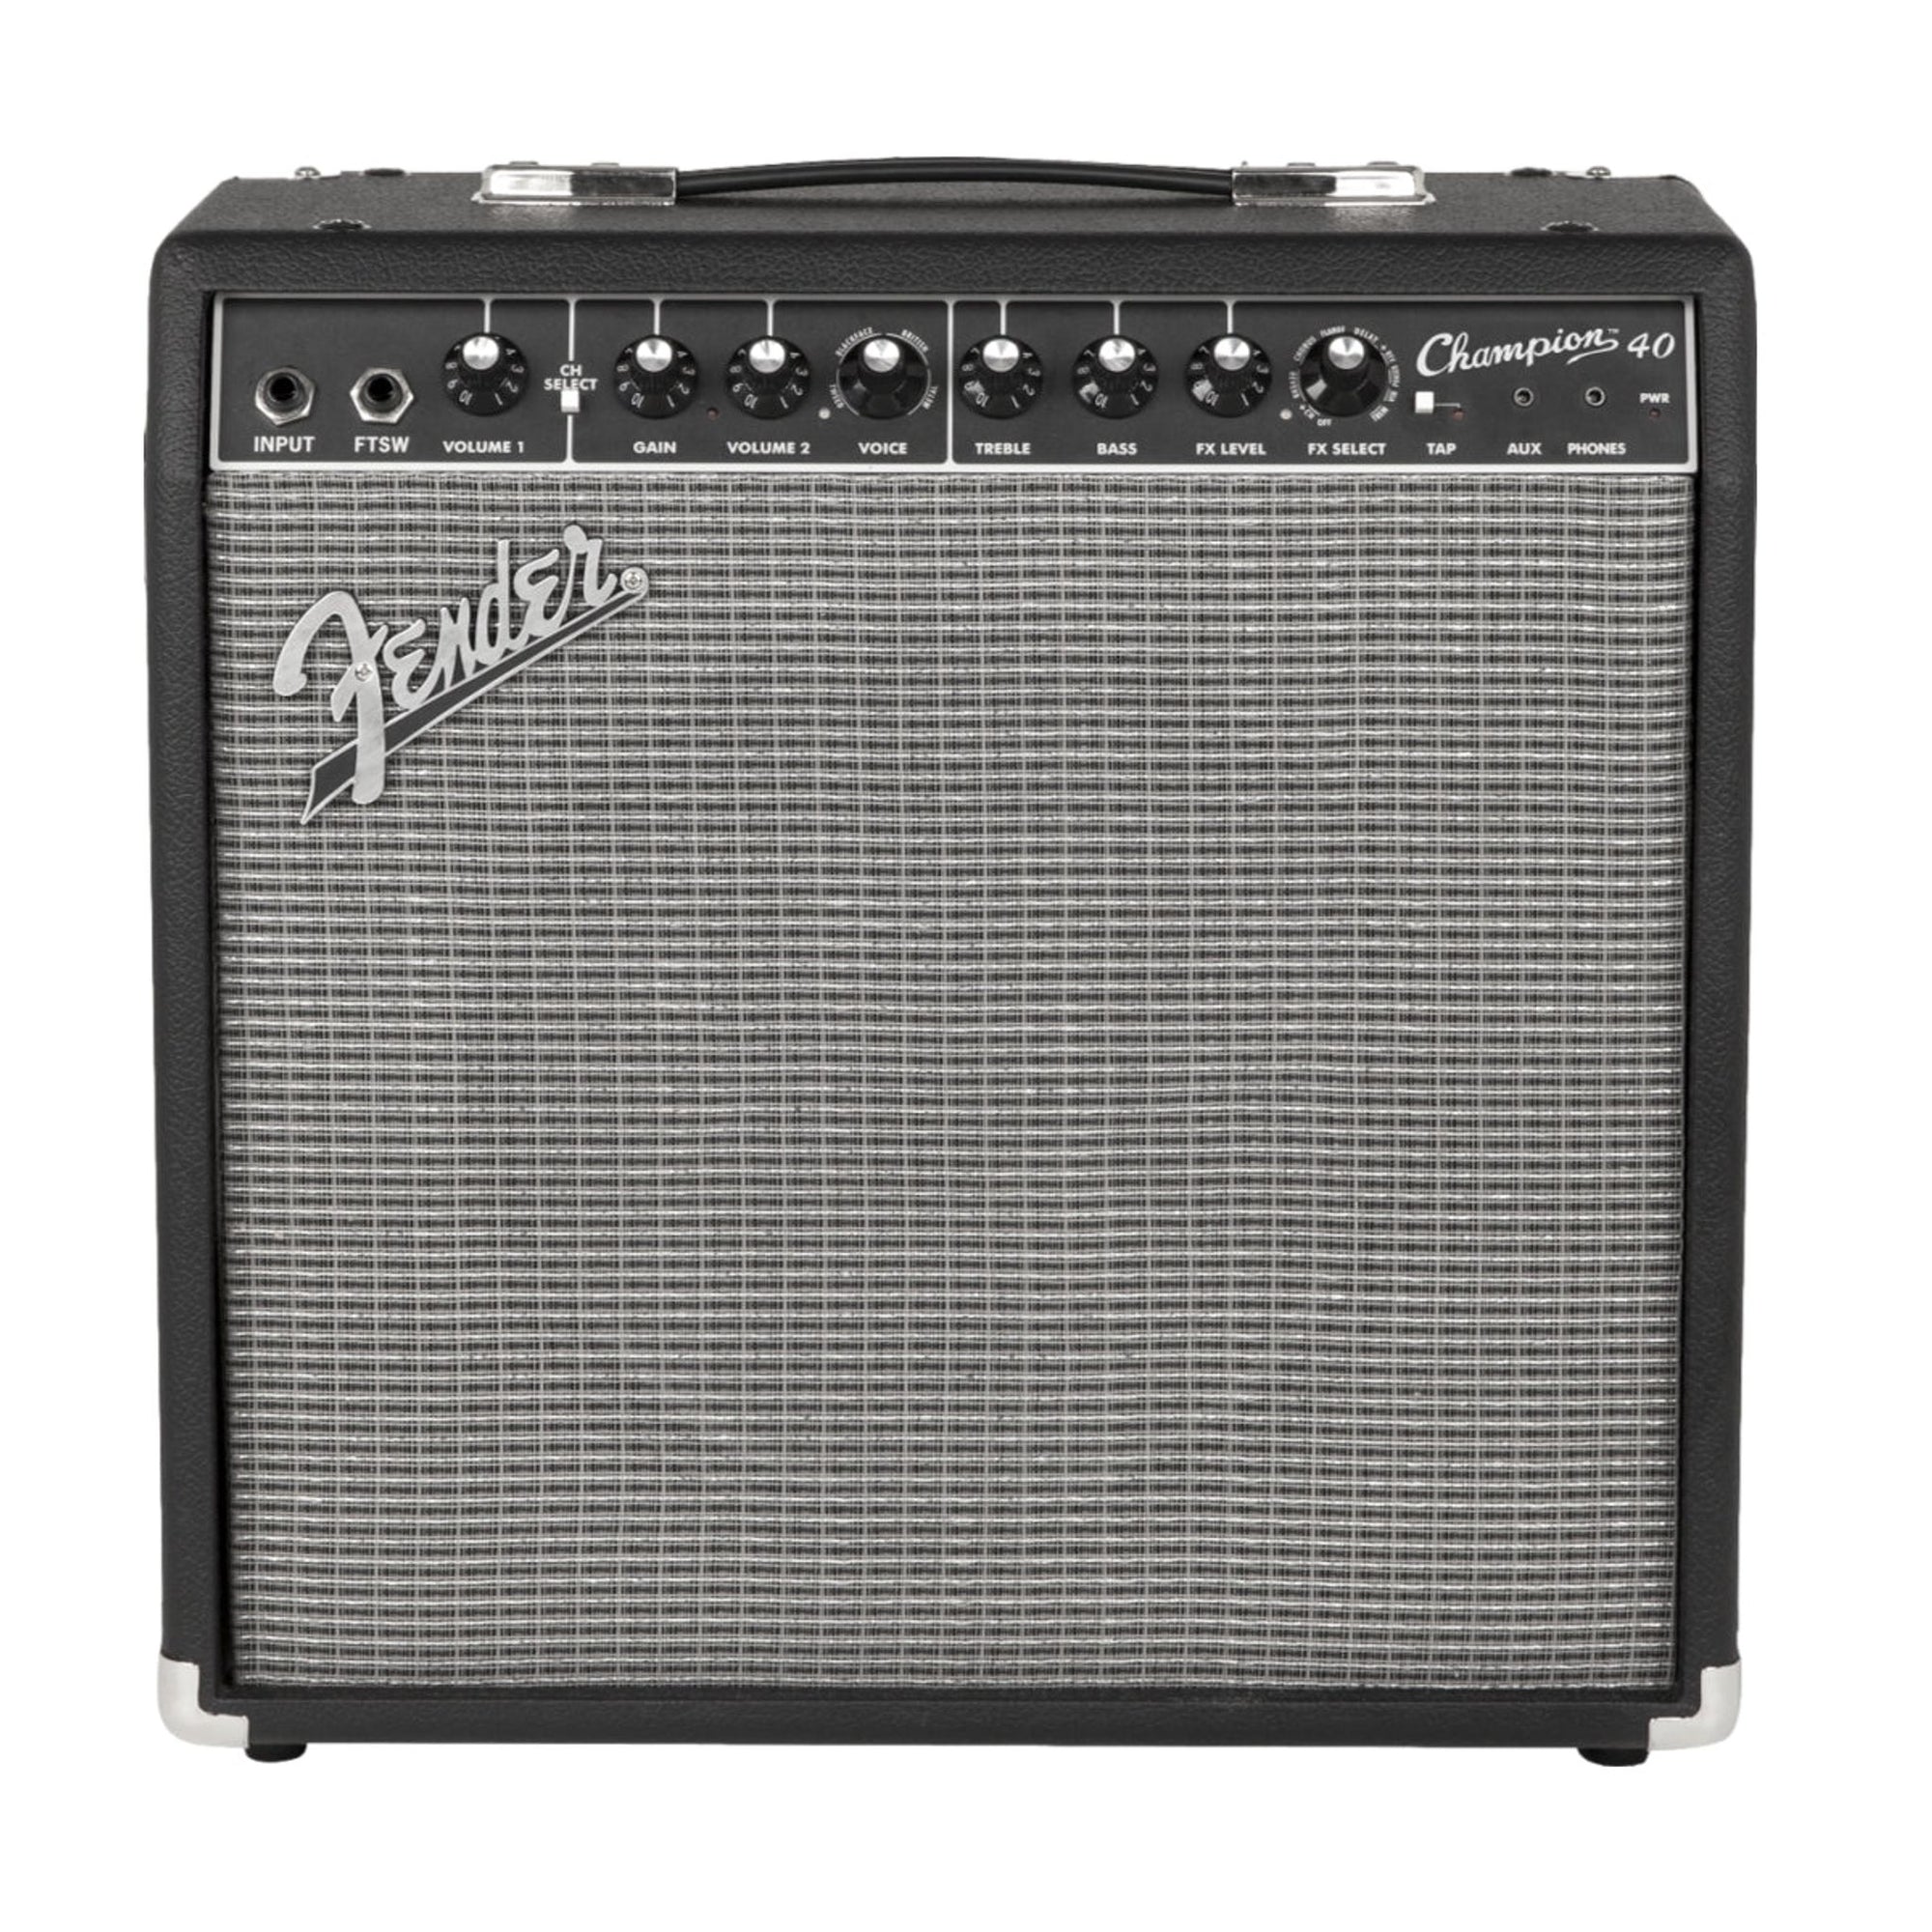 The Fender Champion 40 is easy to use and versatile enough for any style of guitar playing, the 40-watt, 1x12" Champion 40 is an ideal choice as your first practice amp and an affordable stage amp.